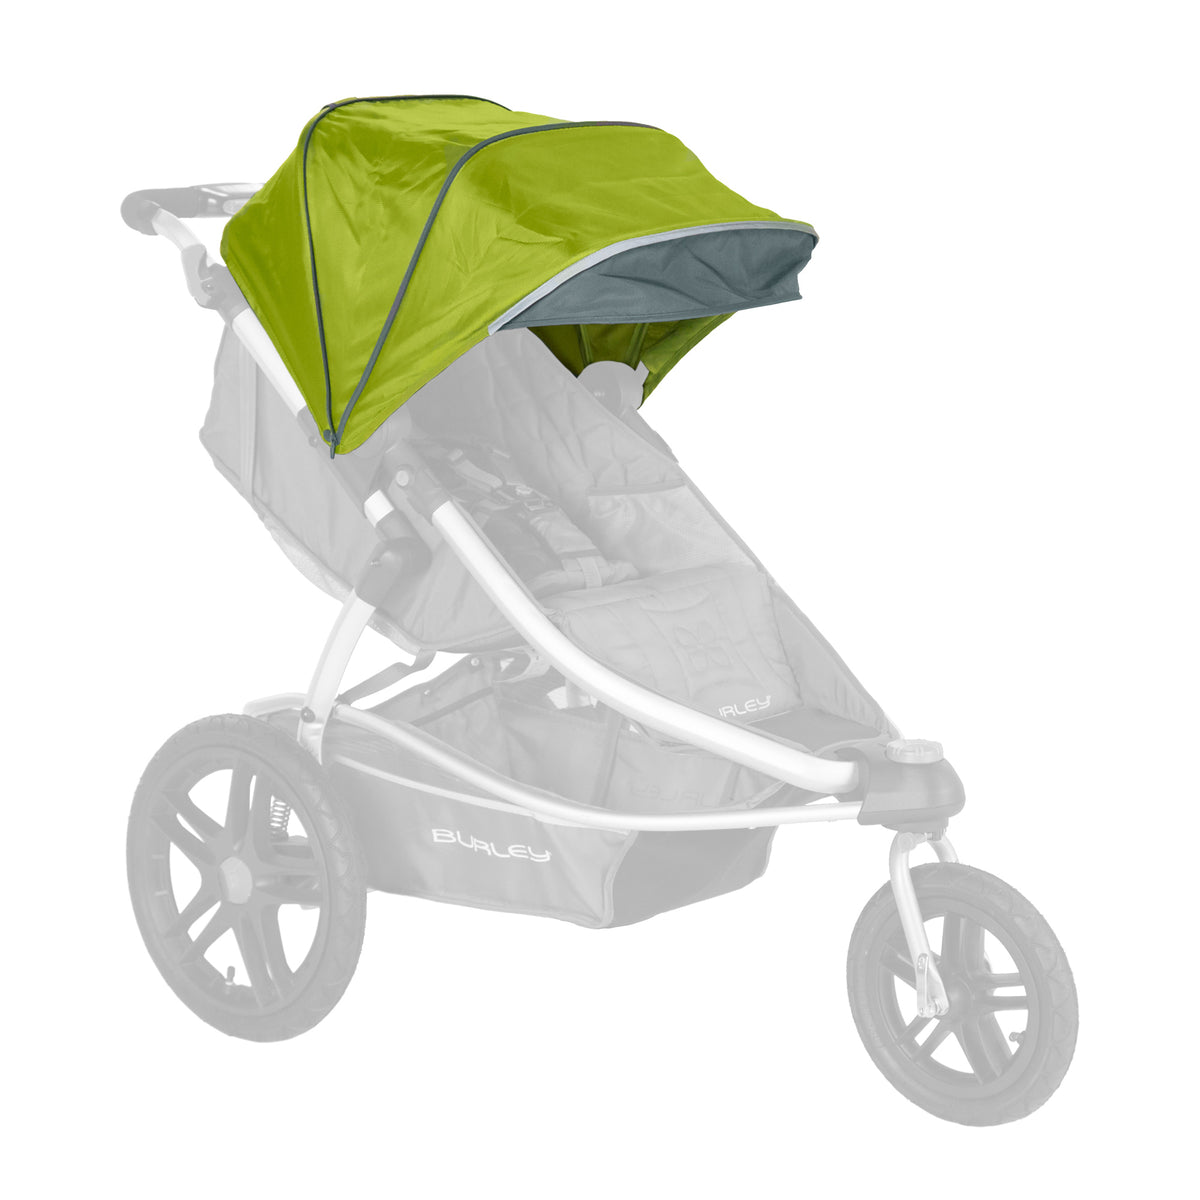 Solstice Replacement Canopy (Green)